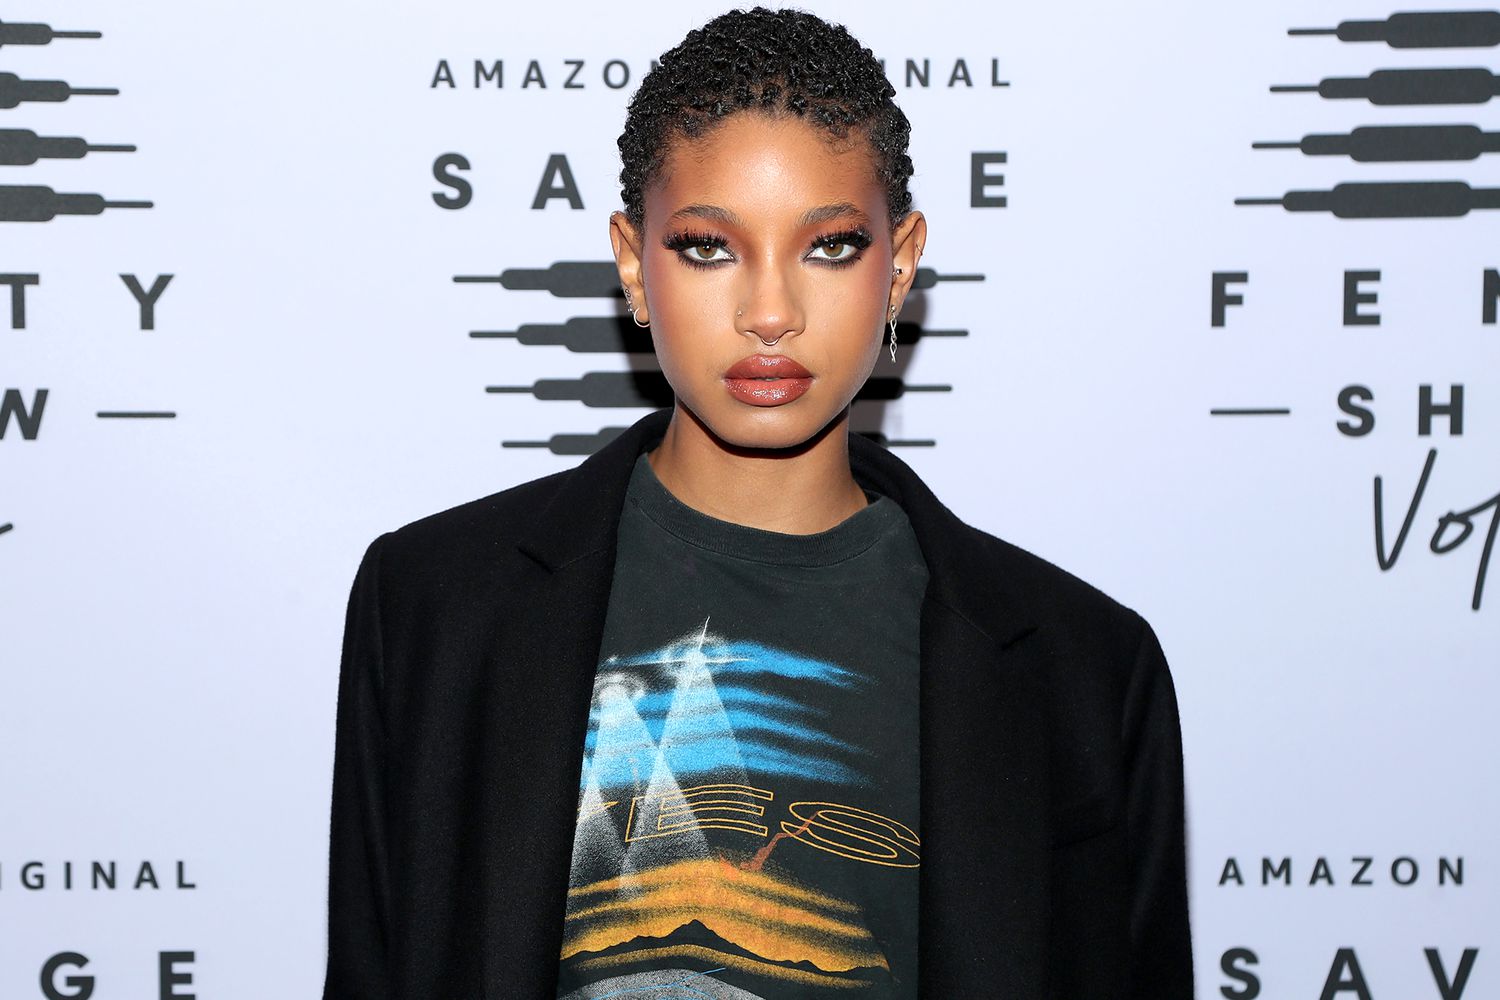 ariel oster recommends willow smith sex tape pic